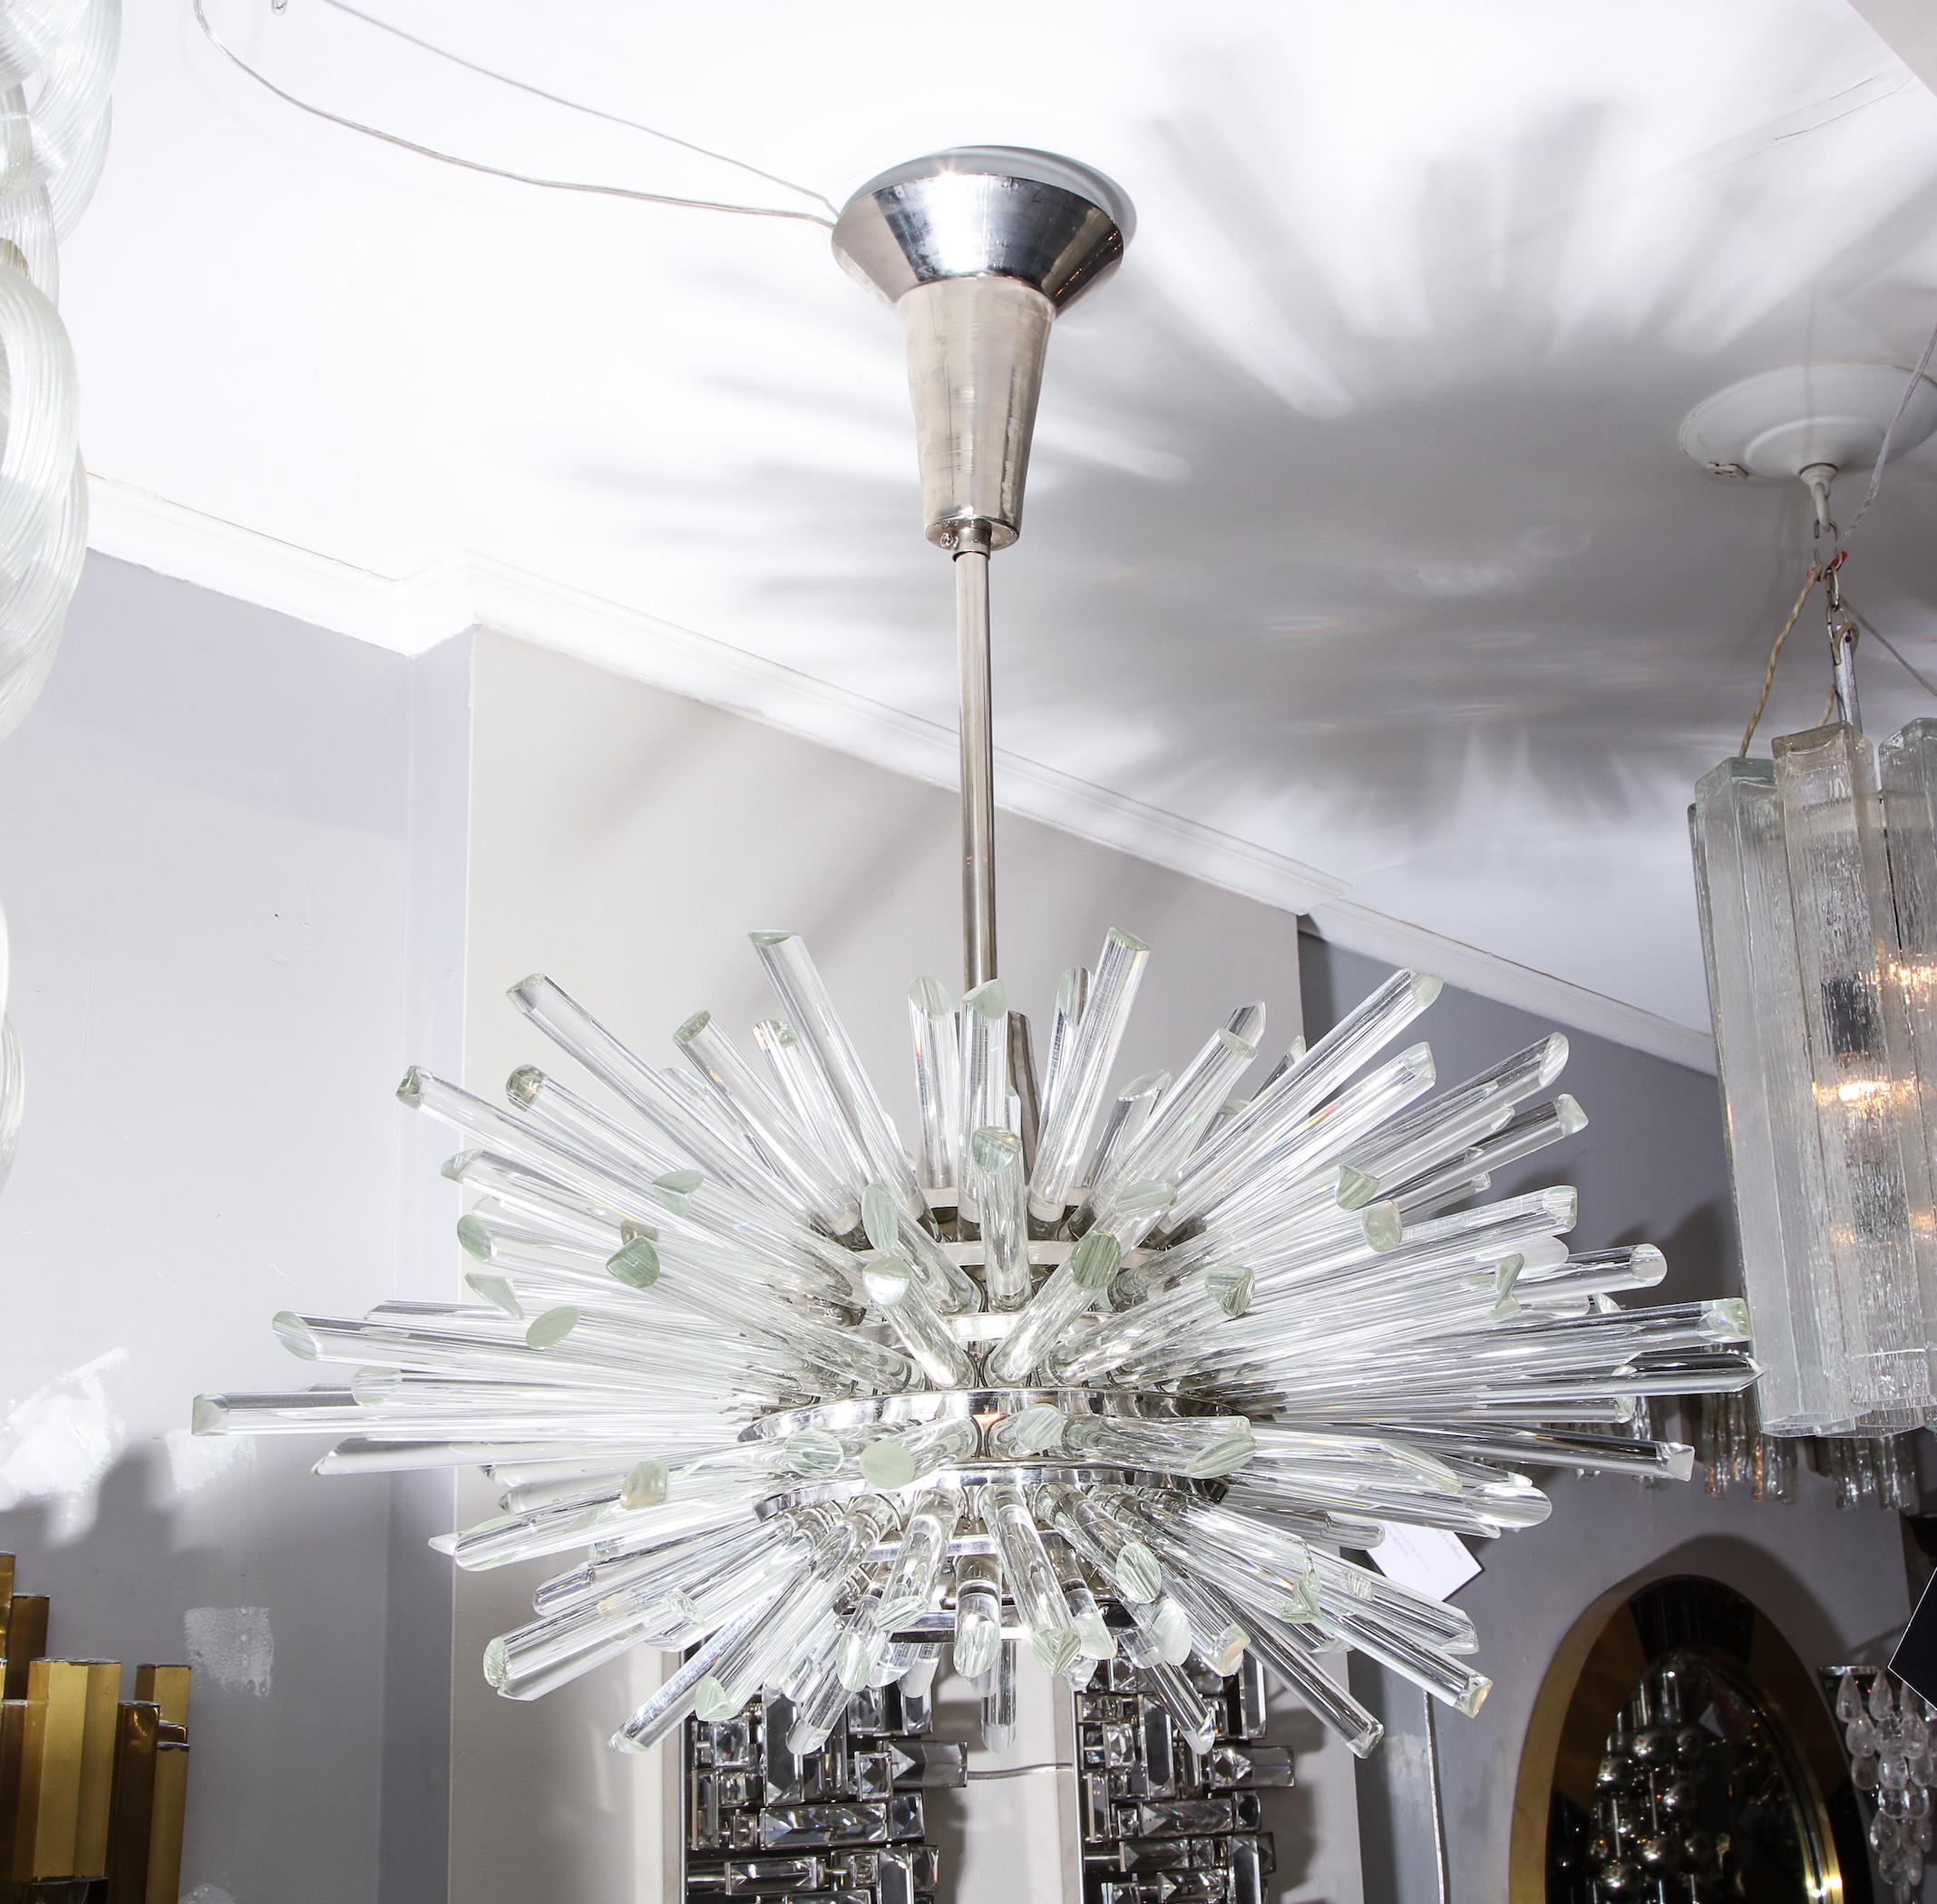 Custom illuminating glass rod Sputnik chandelier in polished nickel finish. Custom orders are available for different sizes and finishes. Please specify overall height you need for the chandelier upon order.